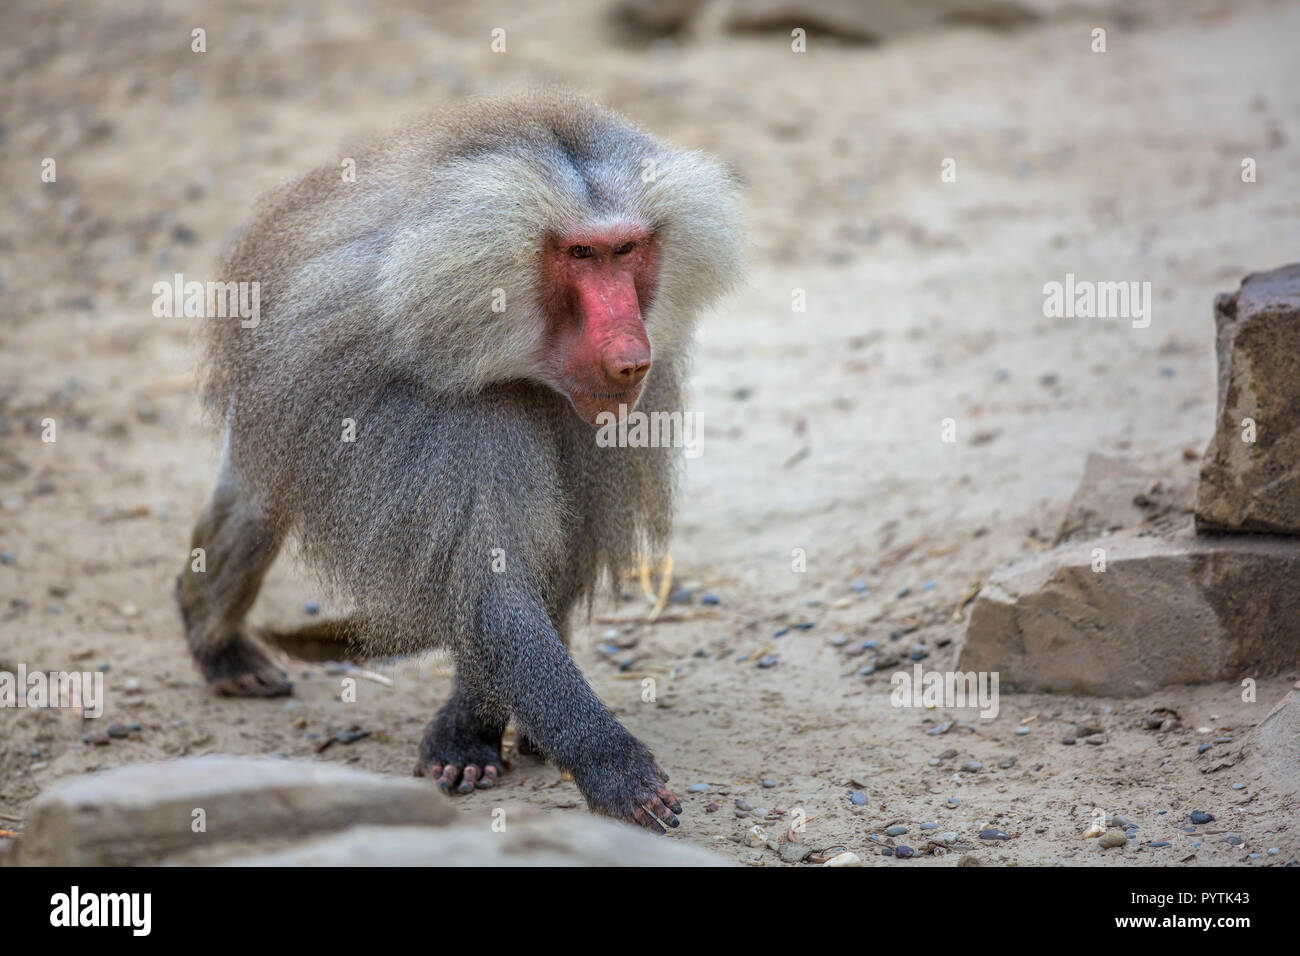 Male Hamadryas baboon (Papio hamadryas) walking through sand. This is a species from the Old World monkey family. Stock Photo